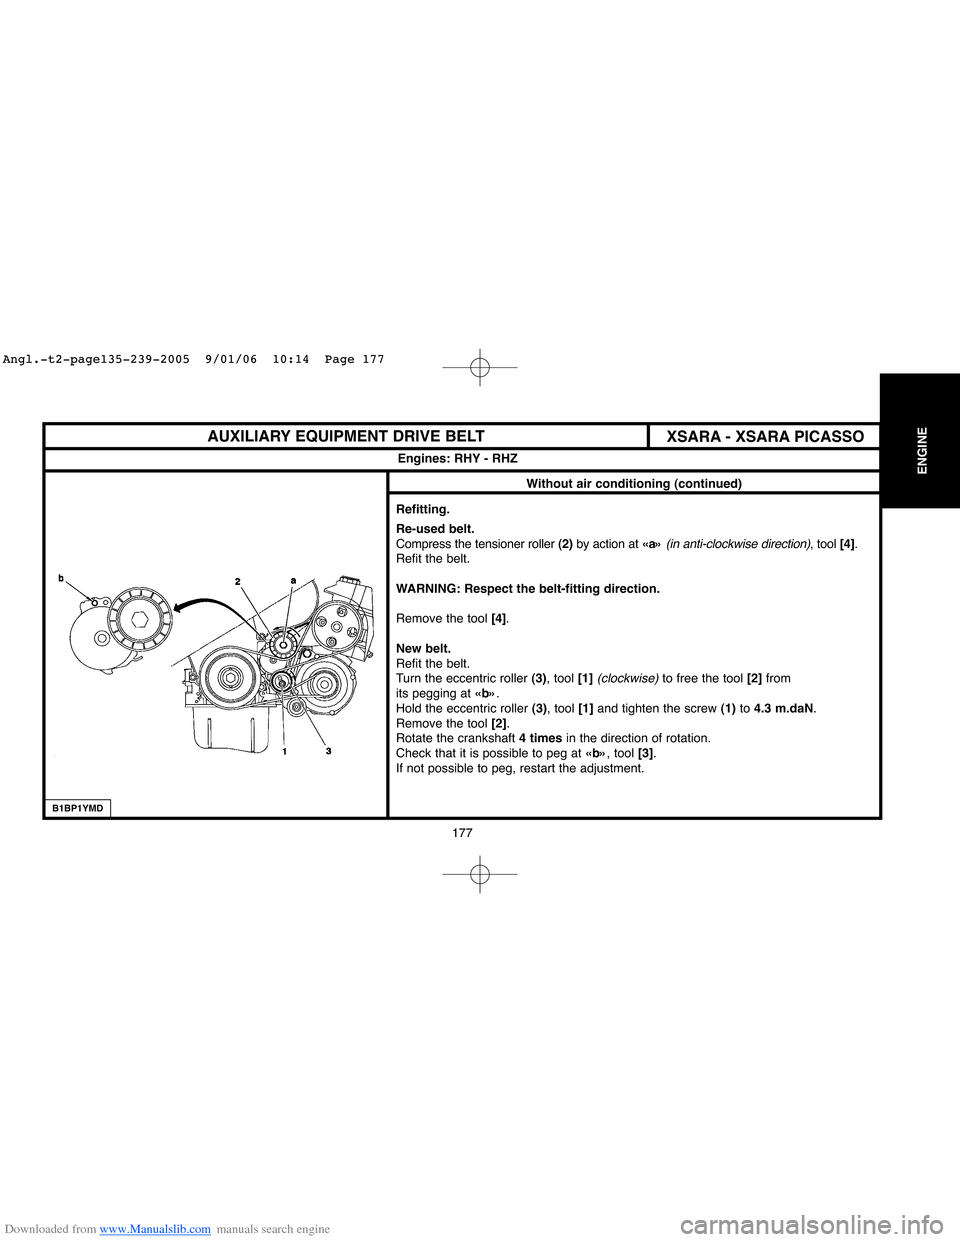 Citroen C4 2005 2.G Service Manual Downloaded from www.Manualslib.com manuals search engine 177
ENGINE
XSARA - XSARA PICASSO AUXILIARY EQUIPMENT DRIVE BELT
Engines: RHY - RHZ
Without air conditioning (continued)
Refitting.
Re-used belt